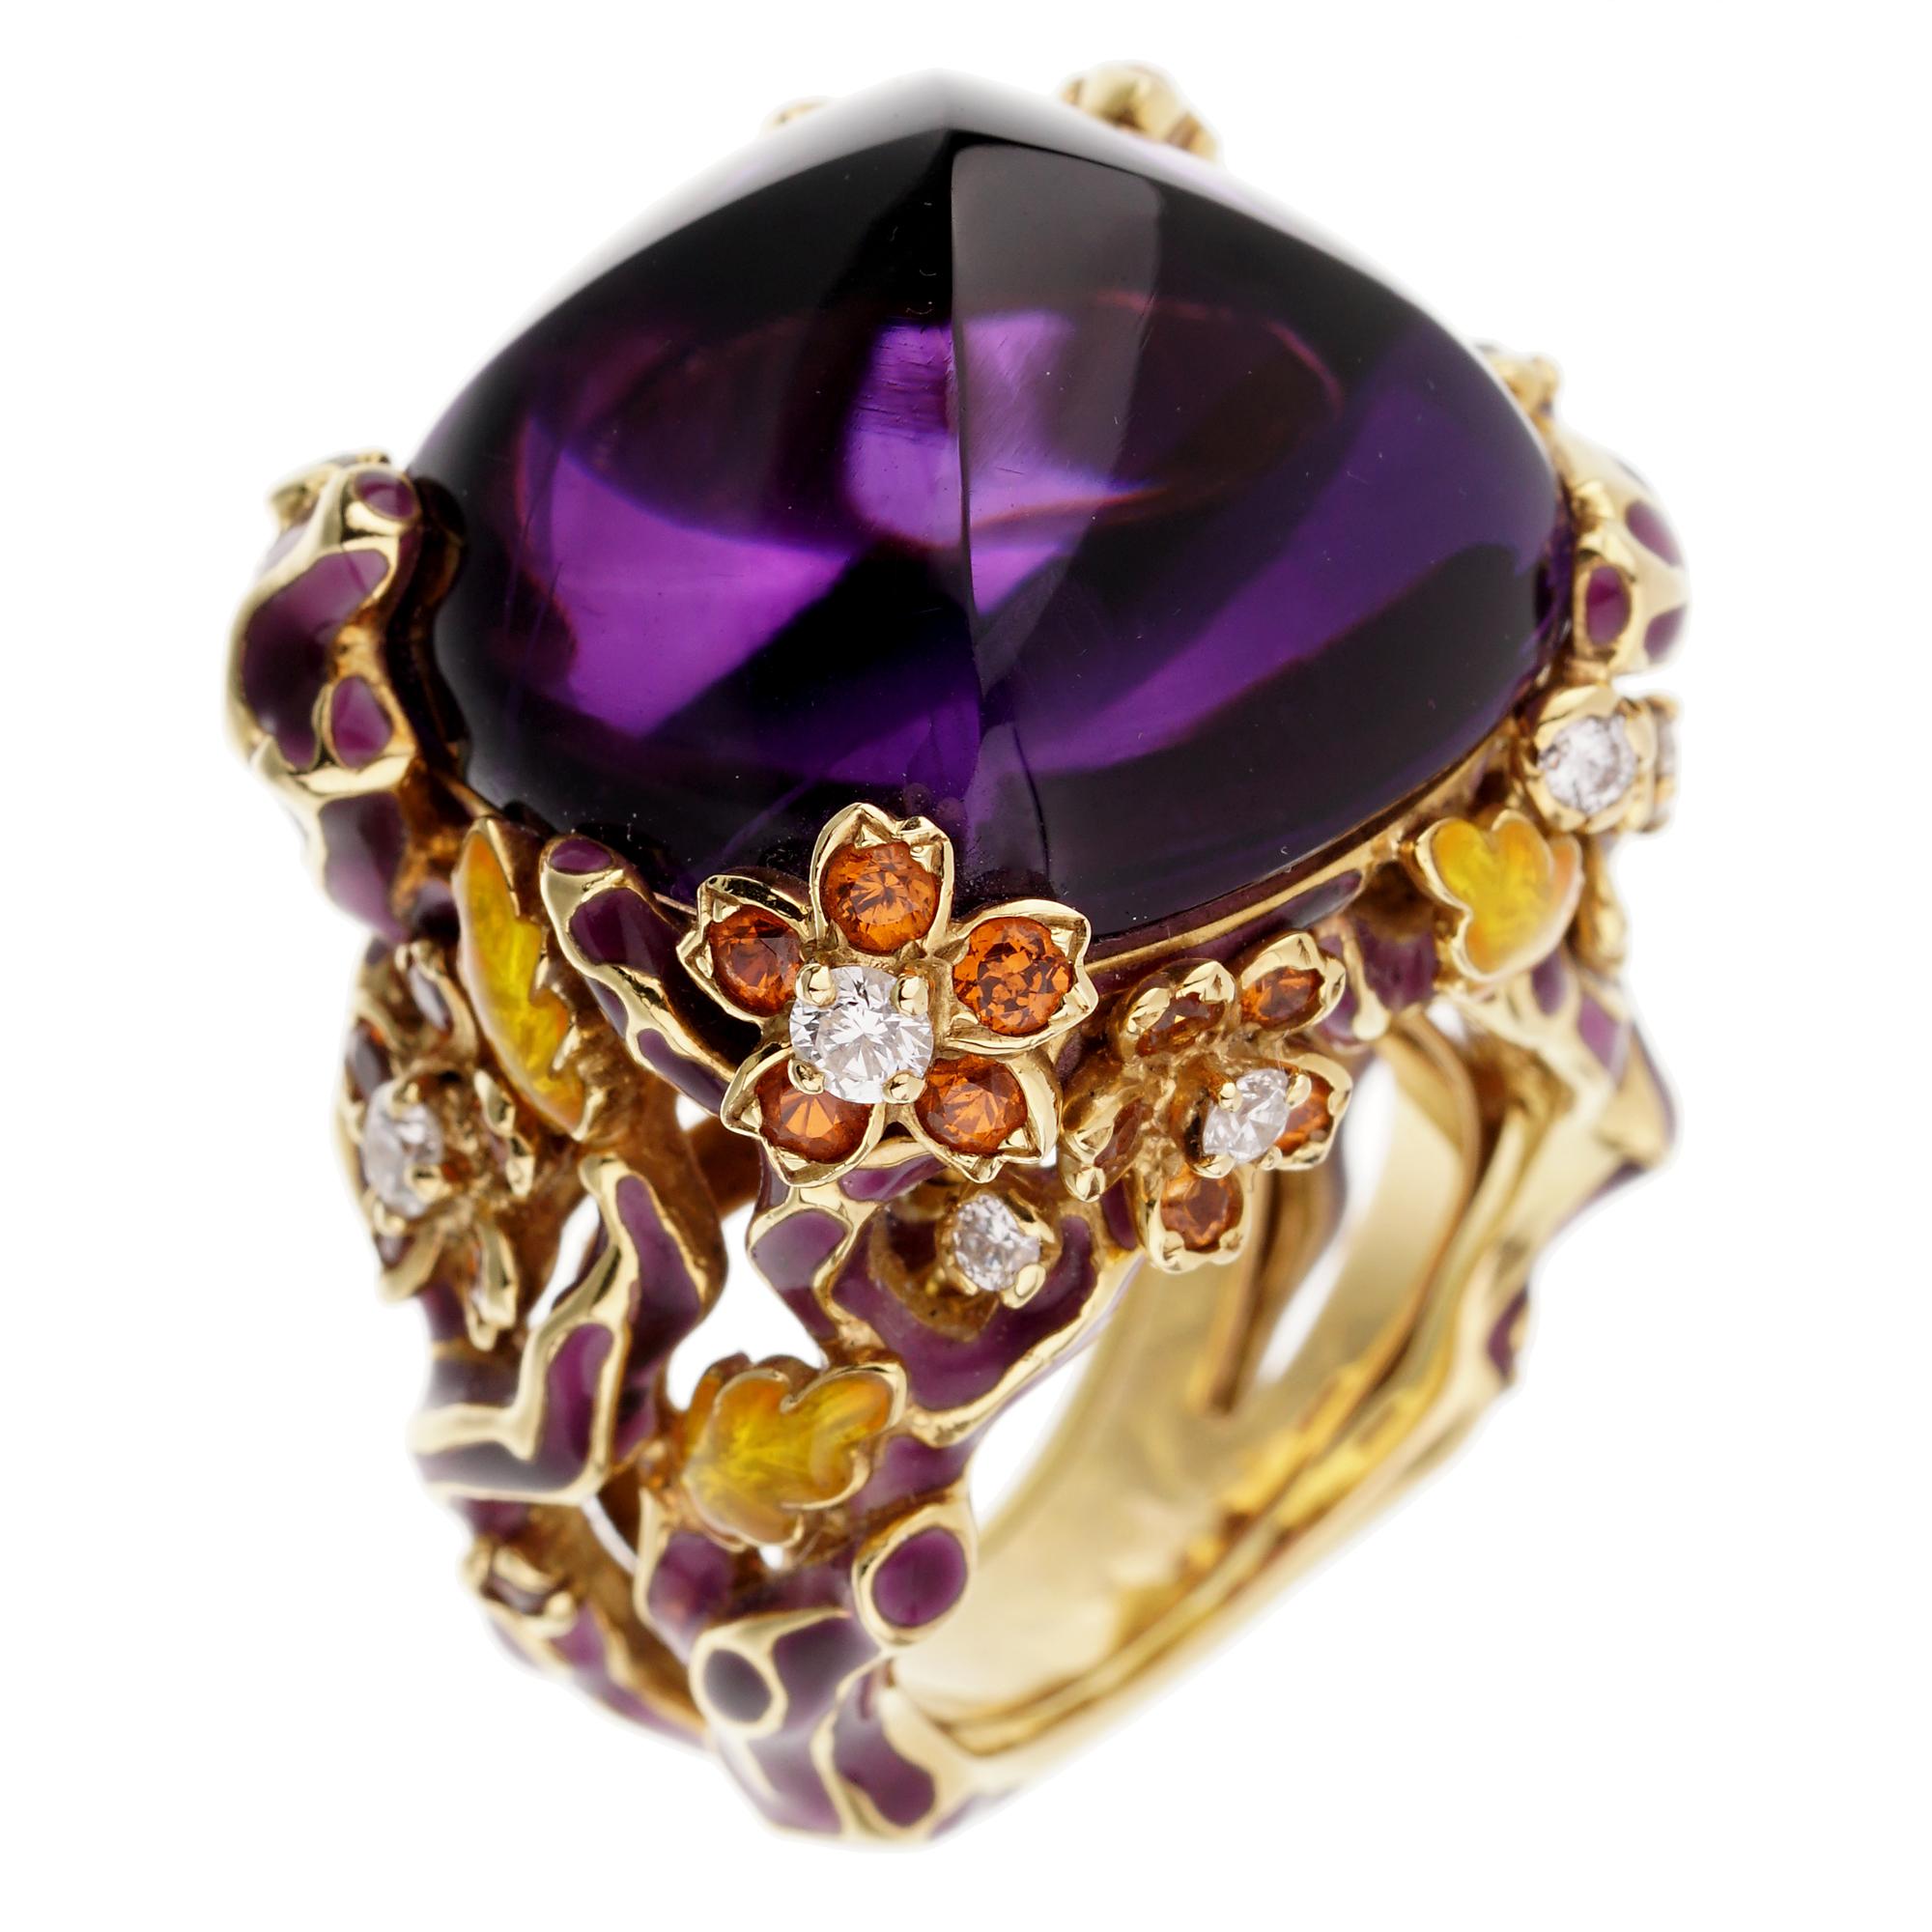 An incredible Dior cocktail showcasing a 40ct sugarloaf cut amethyst adorned with .72ct of round brilliant cut diamonds and 1.63ct of garnet in 18k yellow gold.

The ring retails for 37,000 +Tax USD and comes with the original Dior box

Sku: 2777
